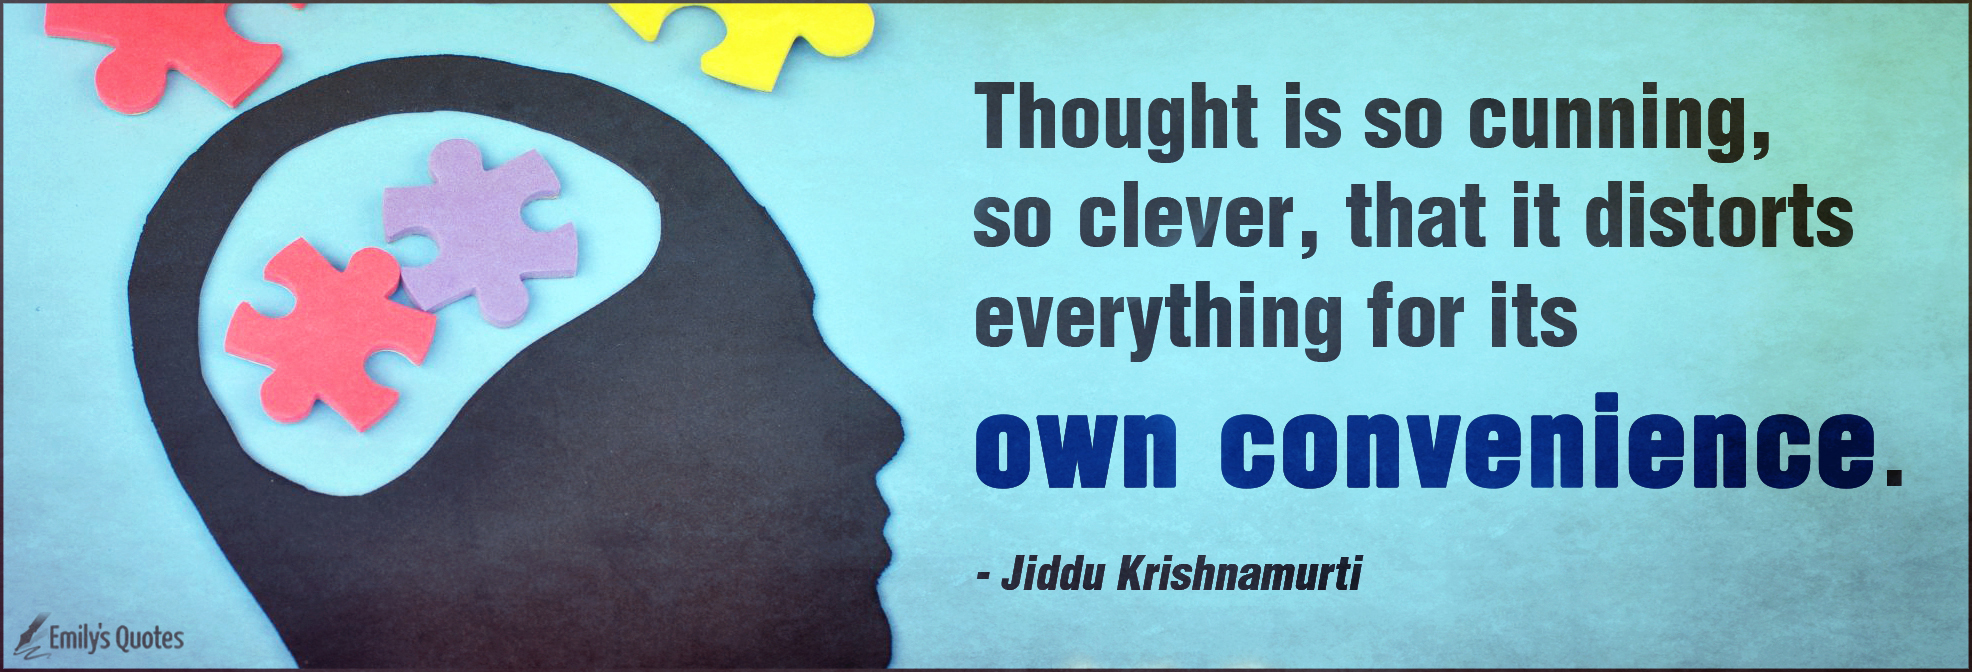 Thought is so cunning, so clever, that it distorts everything for its own convenience